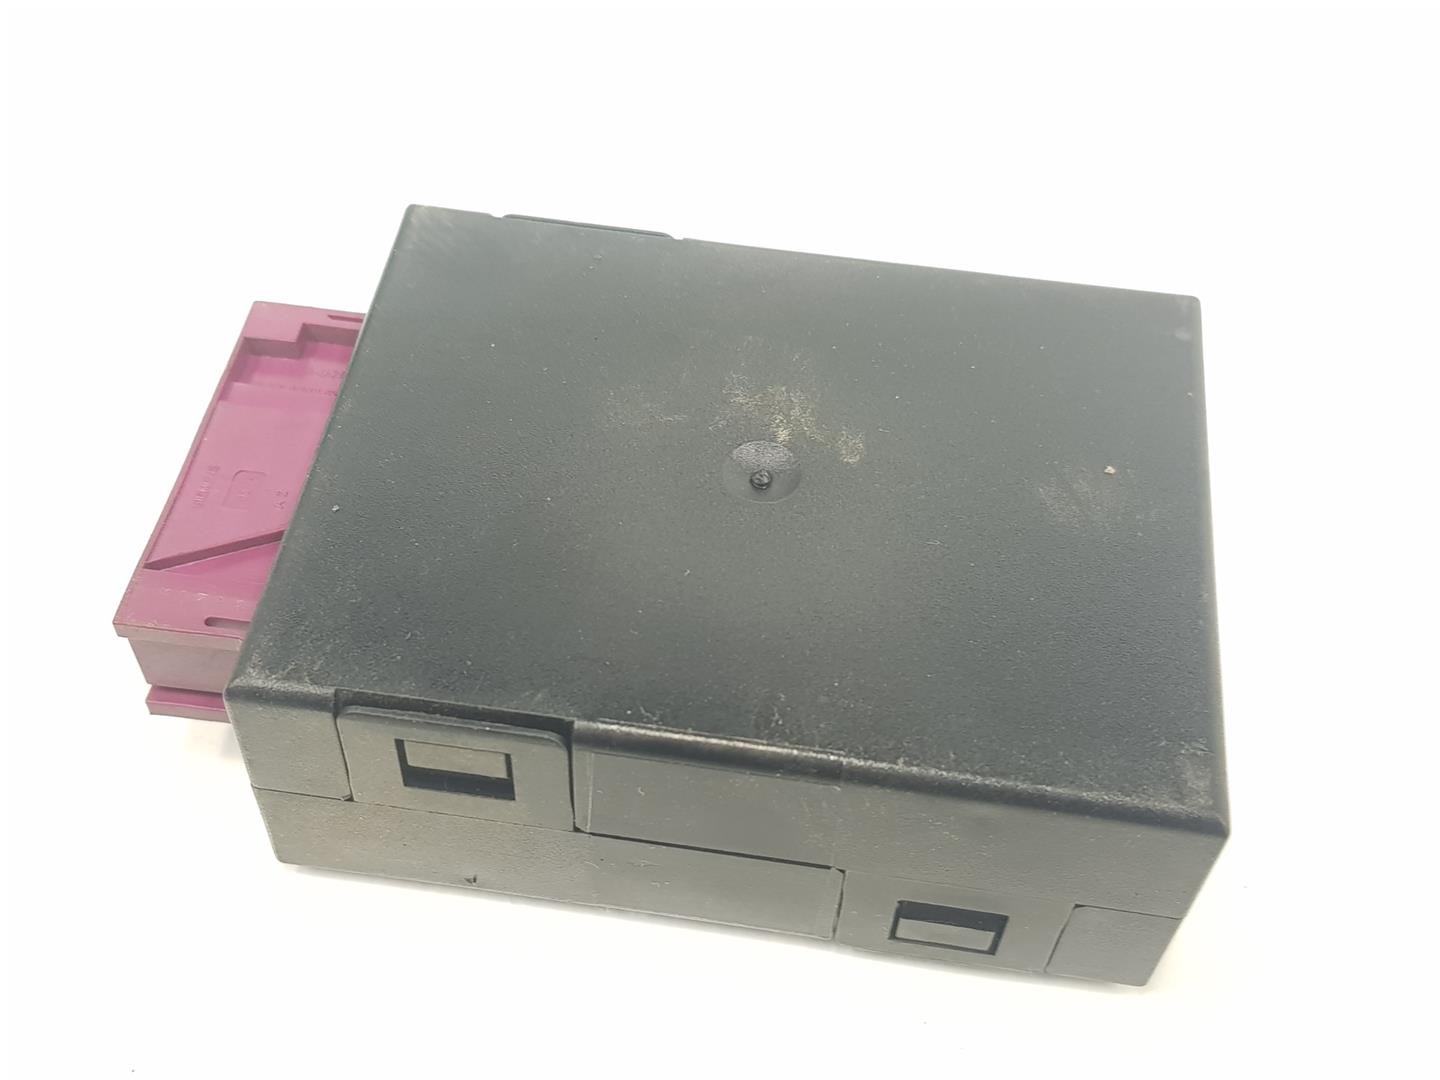 BMW 5 Series E39 (1995-2004) Other Control Units 61358375964, 61358375964 24234841